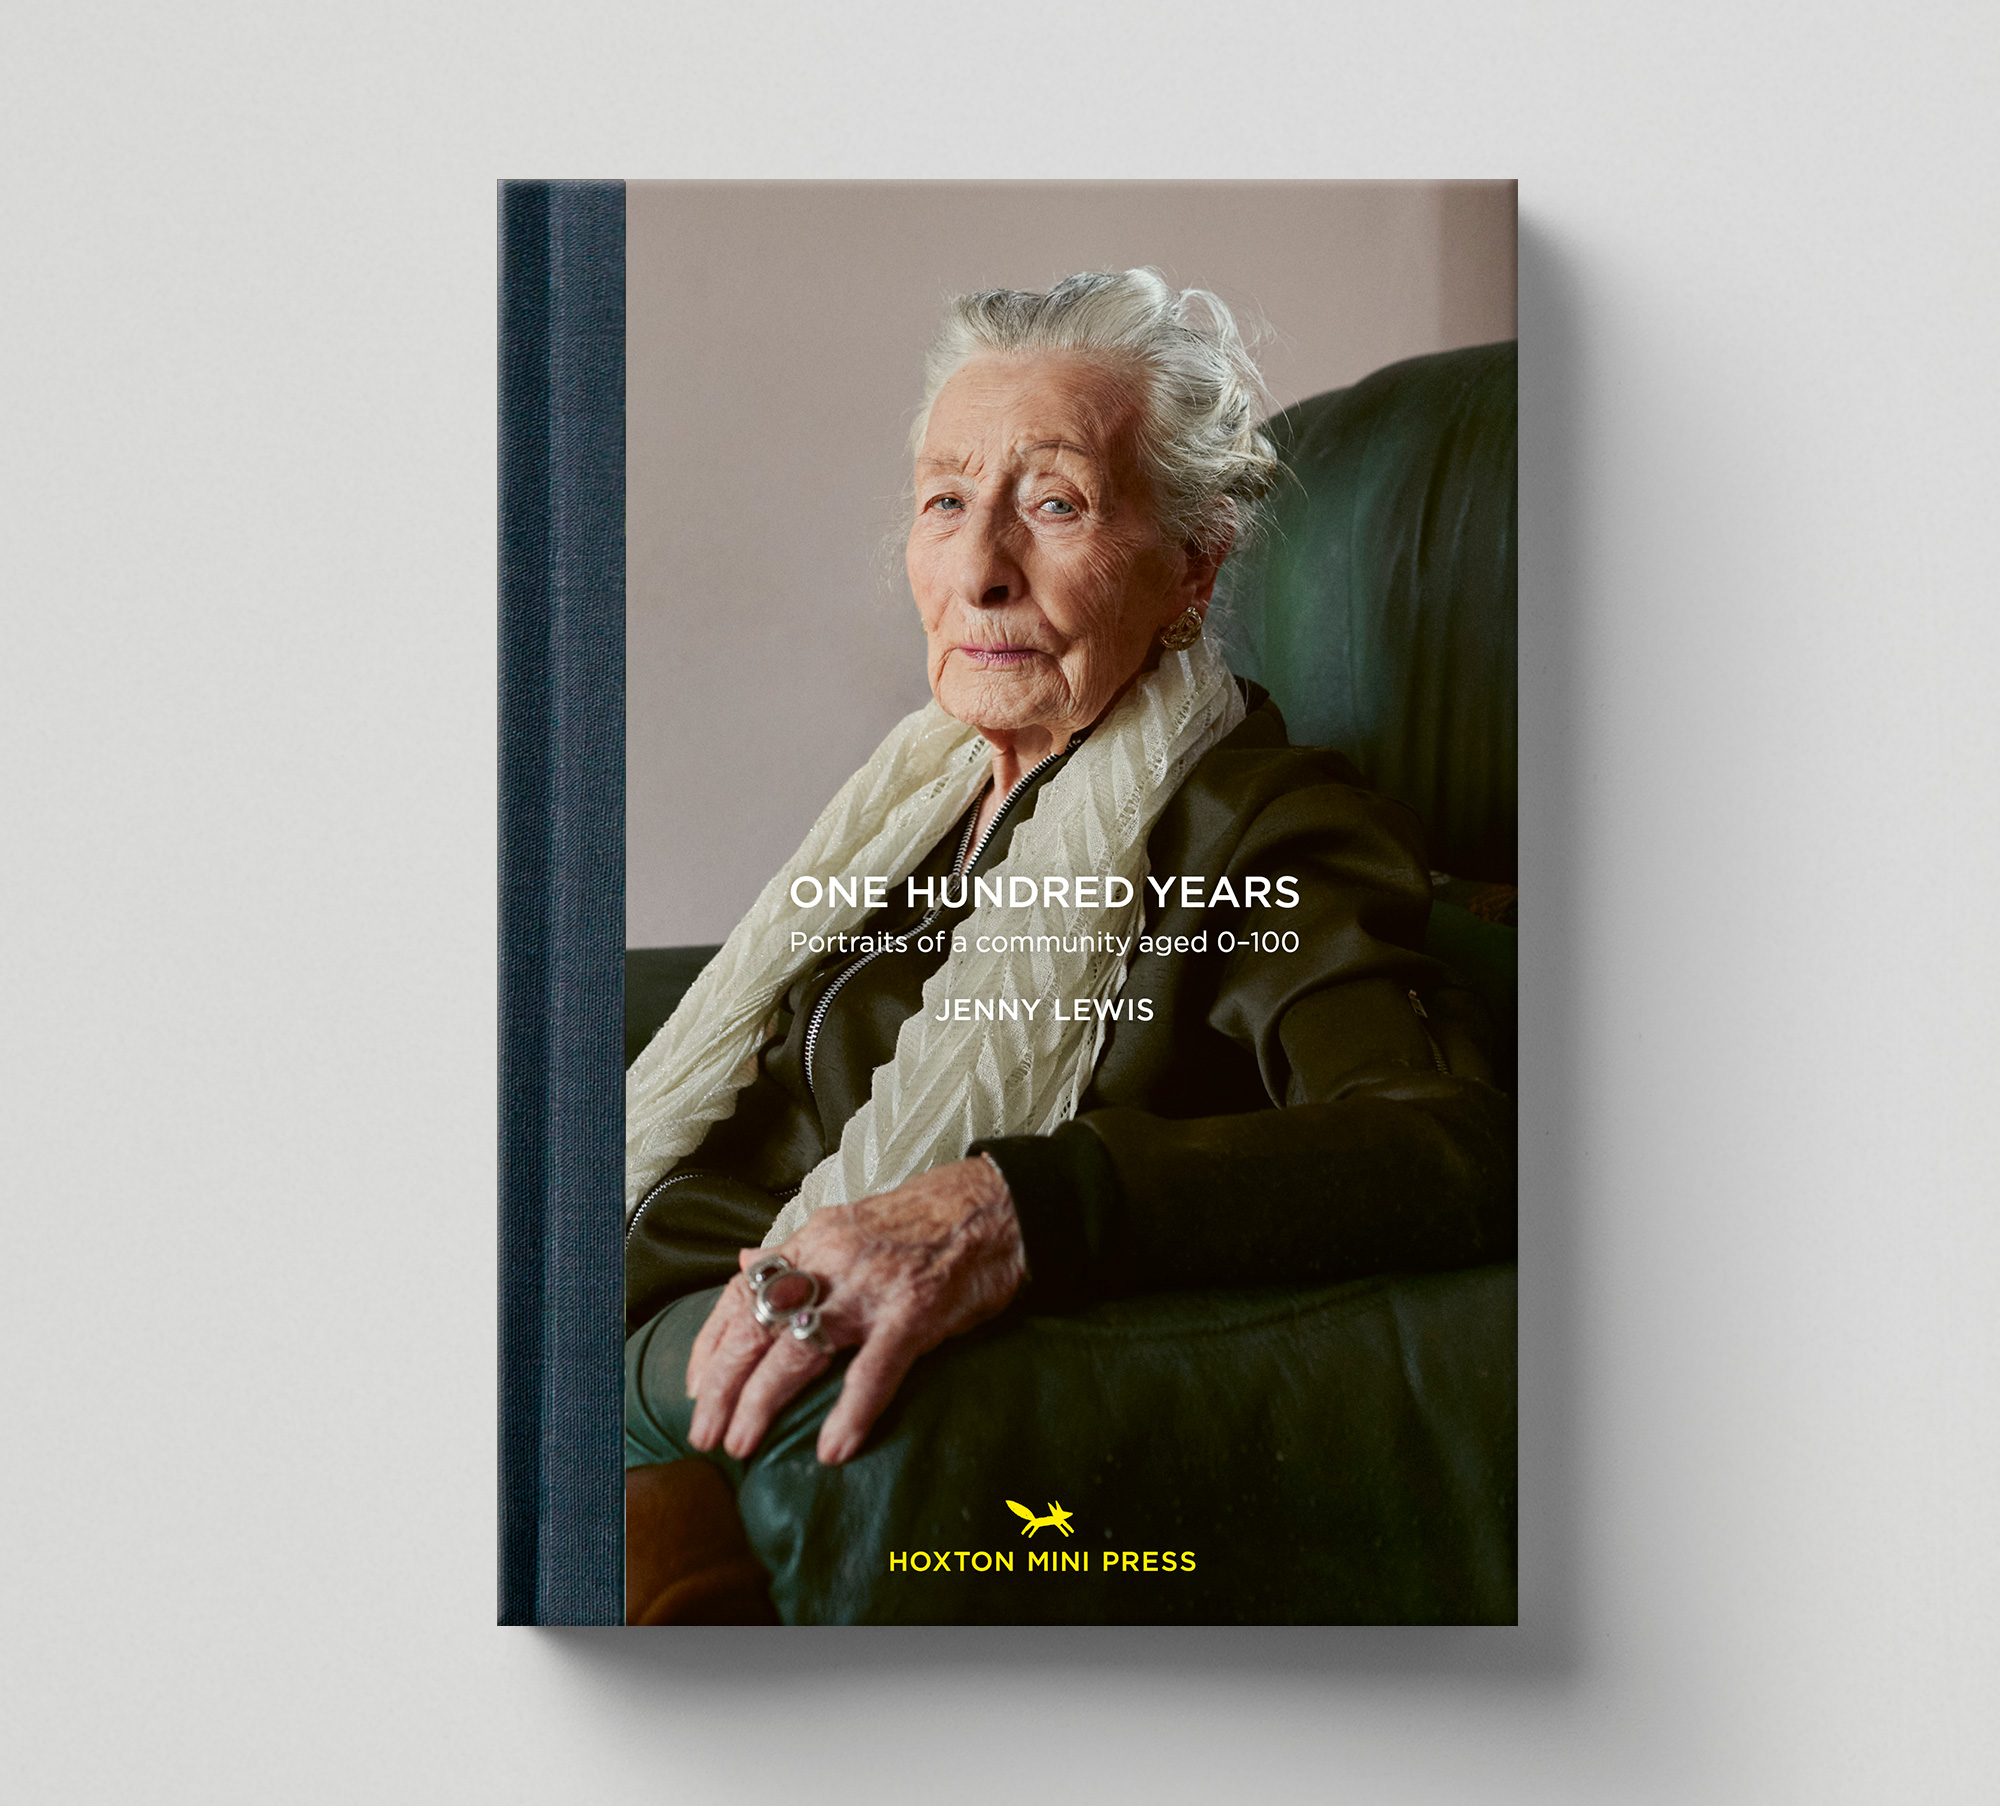 Jenny Lewis, ‘One Hundred Years: Portraits of a community aged 0–100’, Hoxton Mini Press, Photography book